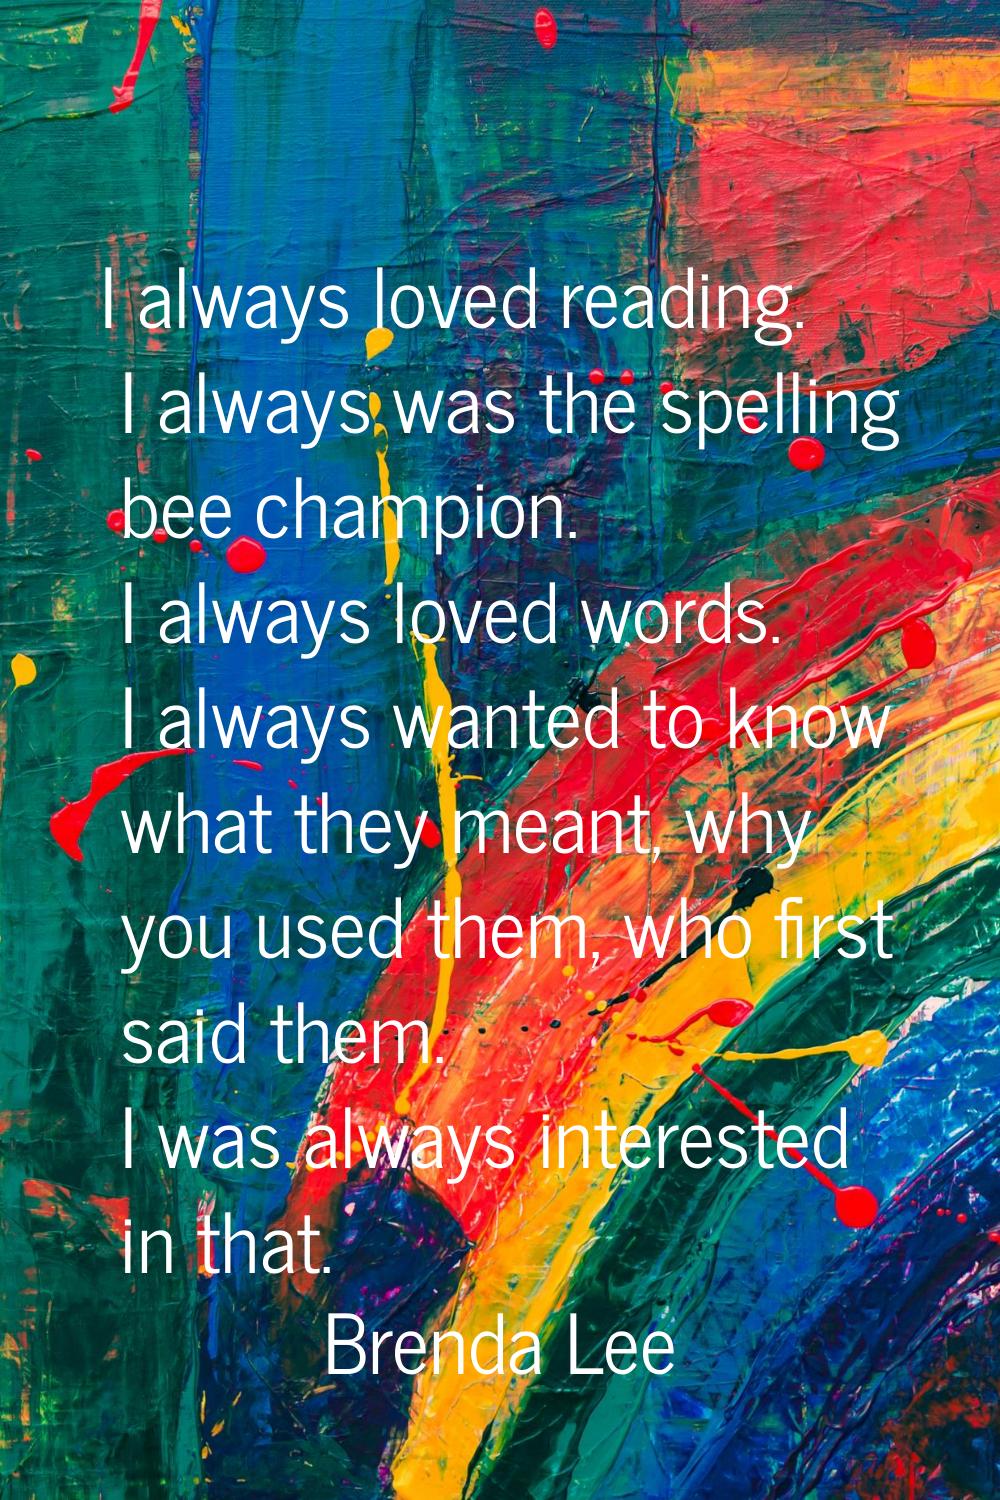 I always loved reading. I always was the spelling bee champion. I always loved words. I always want